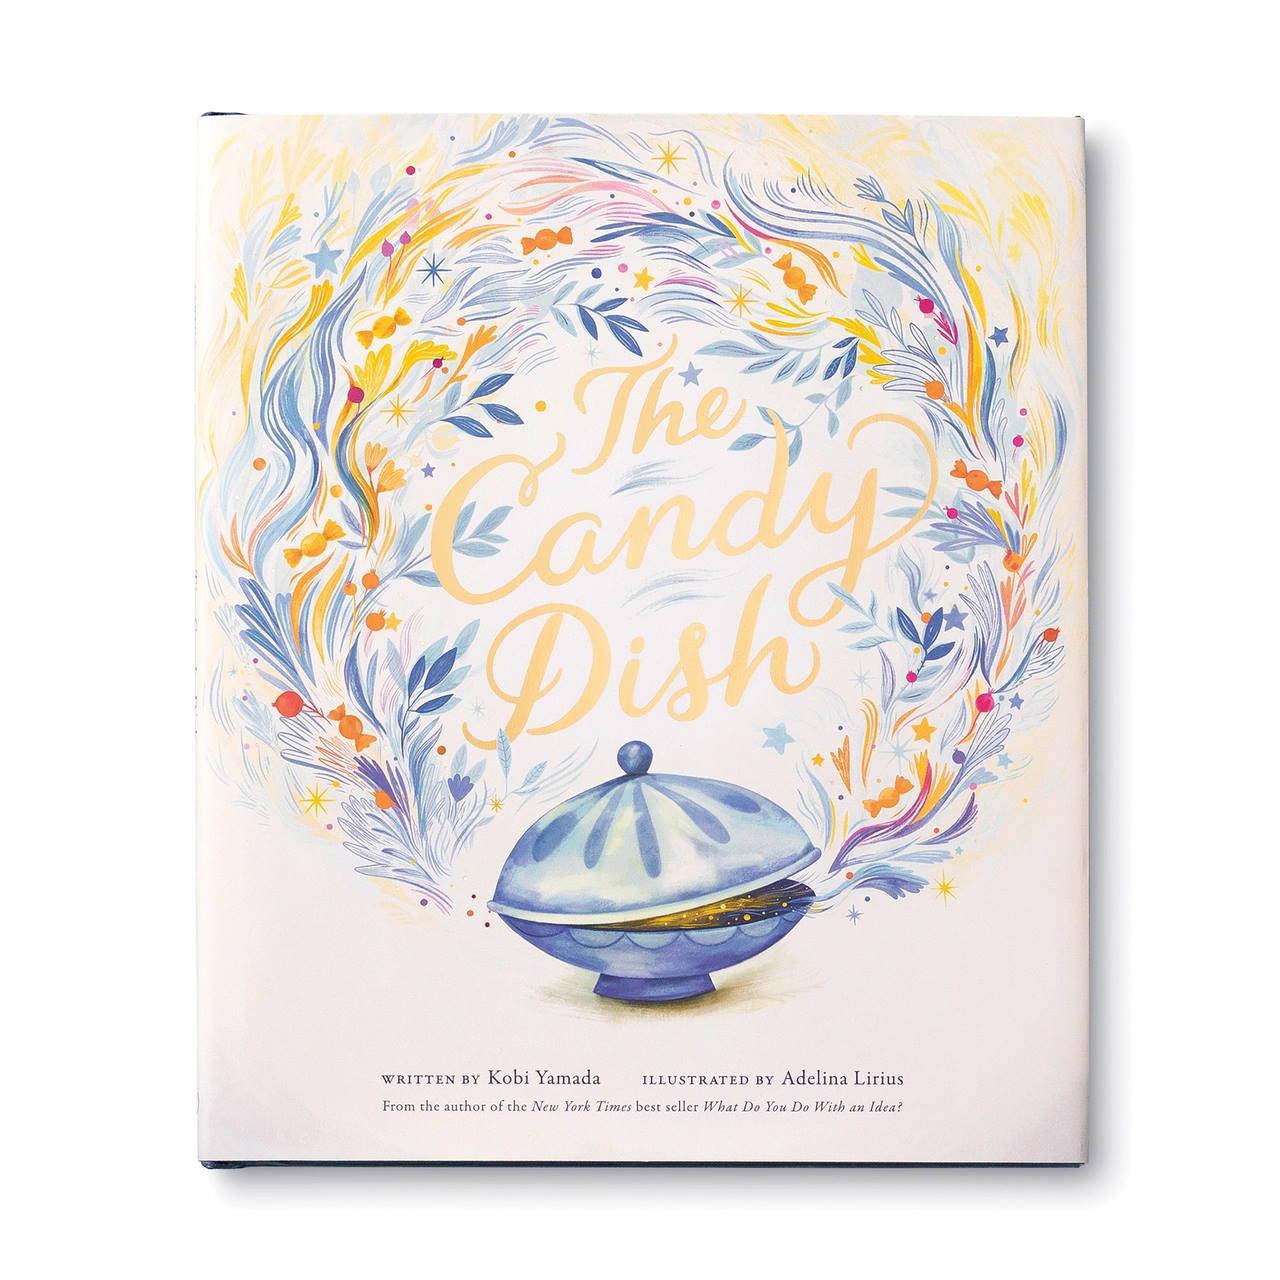 "The Candy Dish" Book illustrated by Adelina Lirius and written by Kobi Yamada.